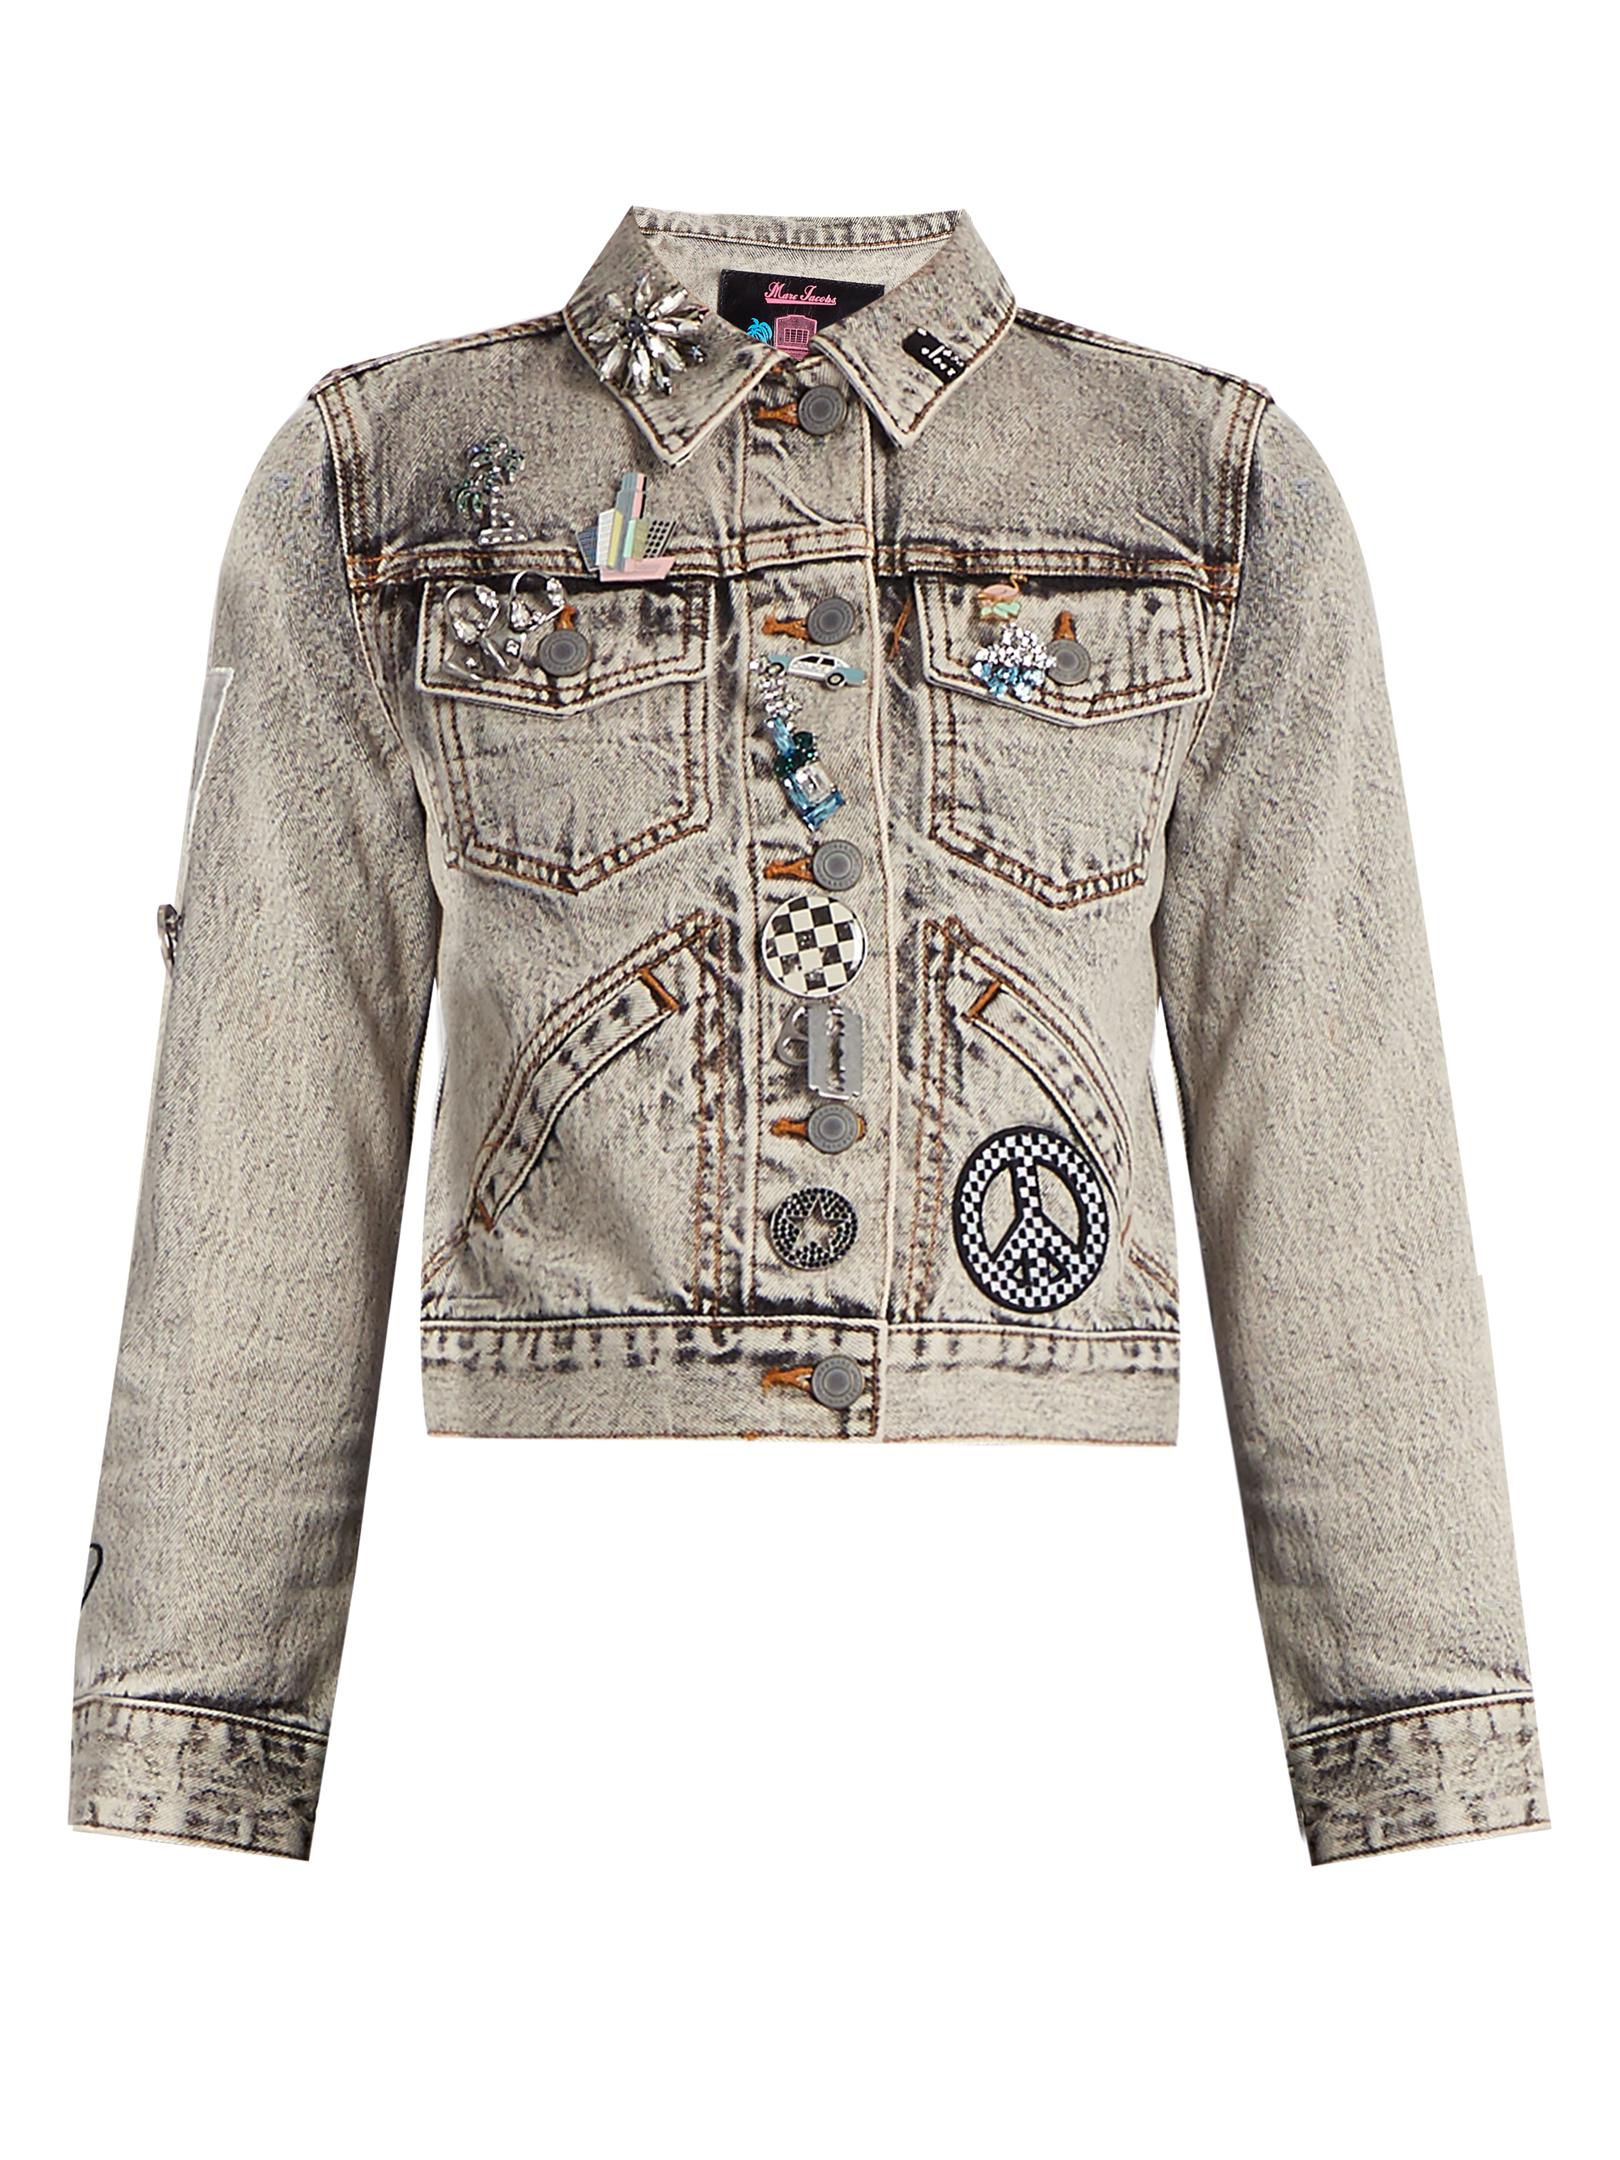 Marc Jacobs Paradise-embellished Denim Jacket in Gray | Lyst